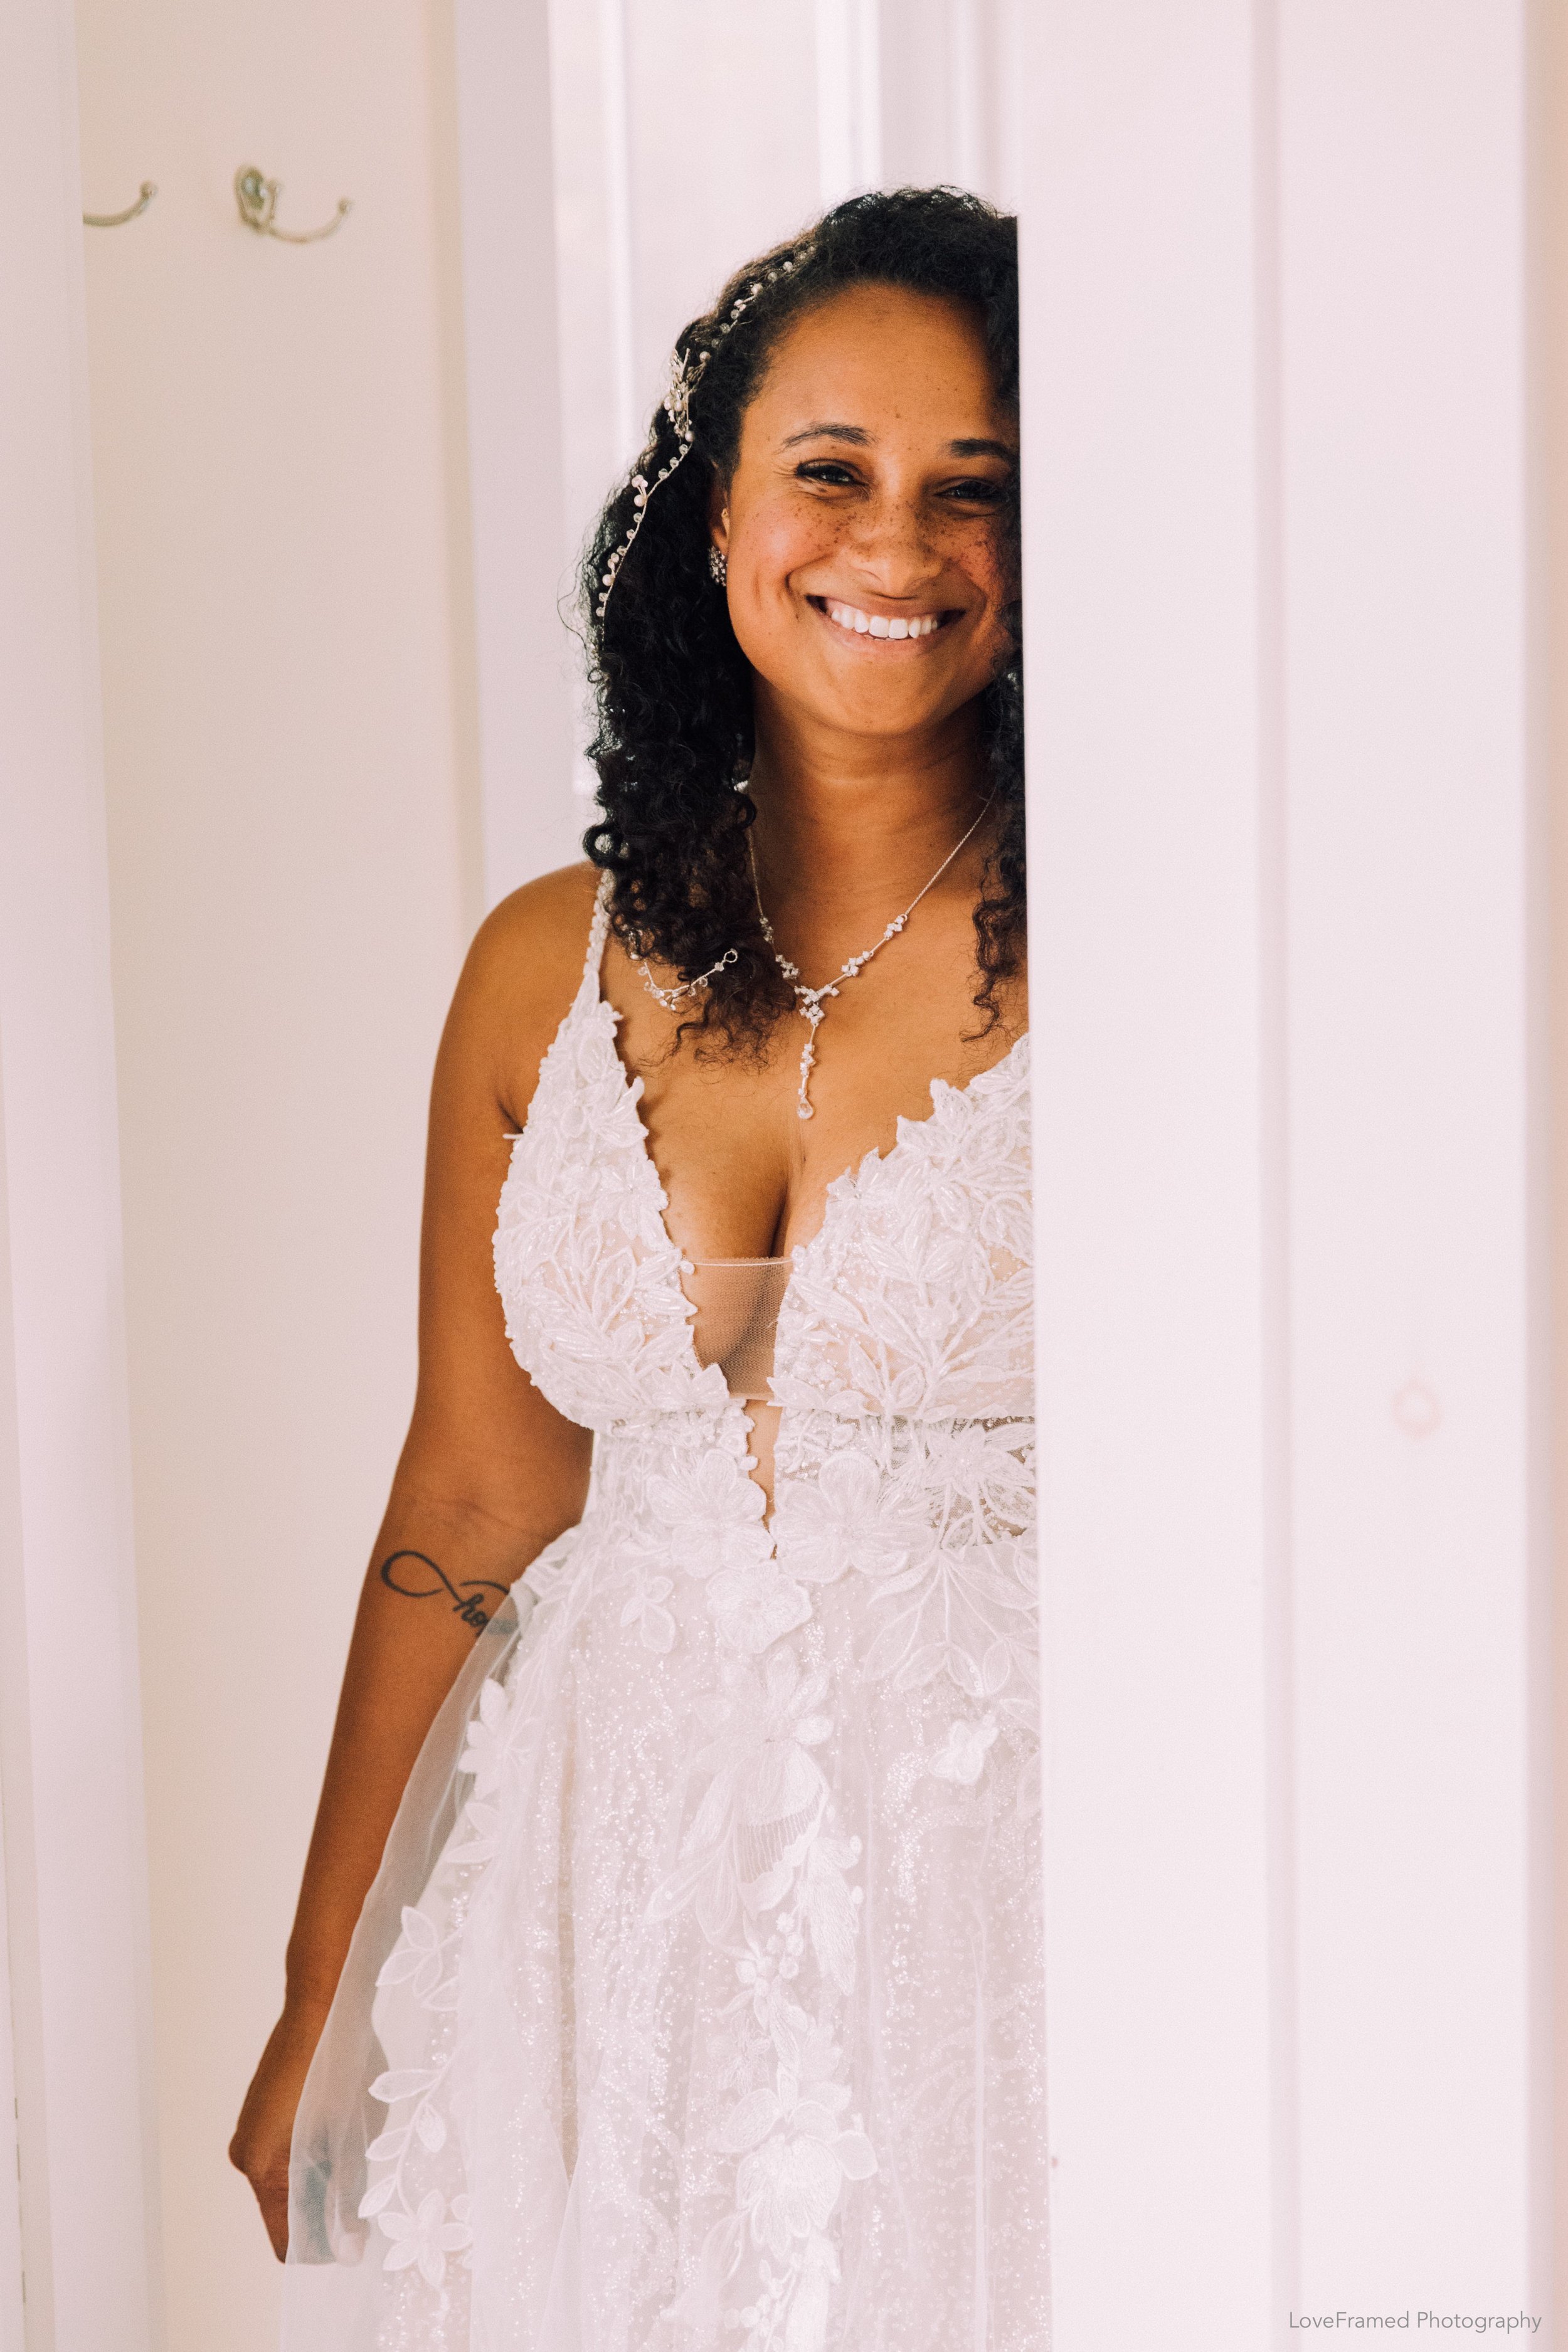 A bride standing in a room before her wedding